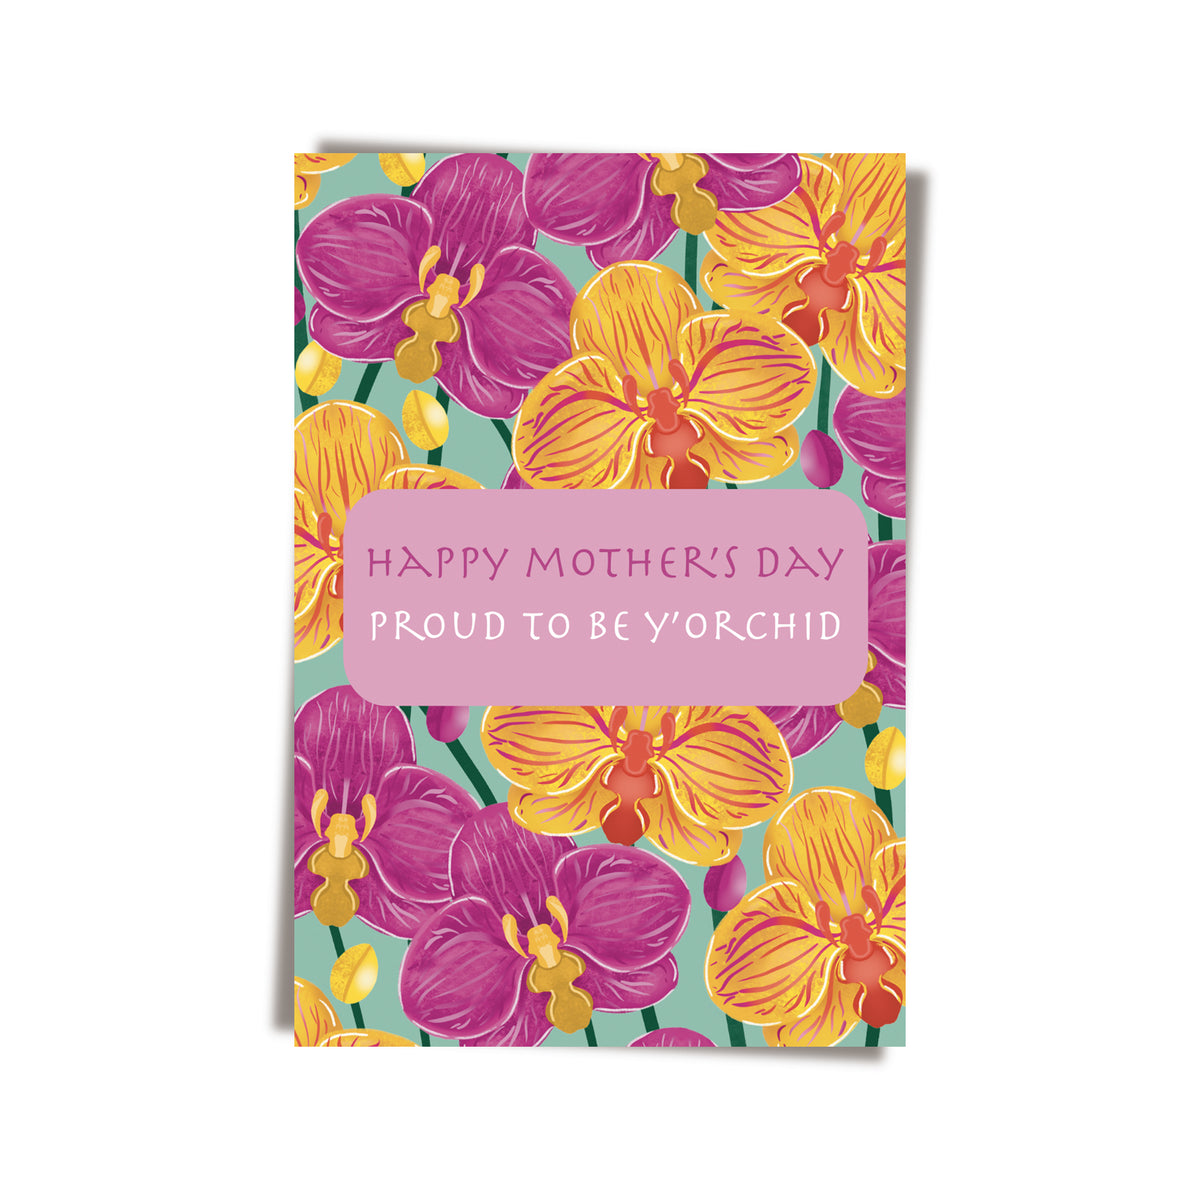 GREETING CARD: MOTHER'S DAY - PROUD TO BE Y'ORCHID